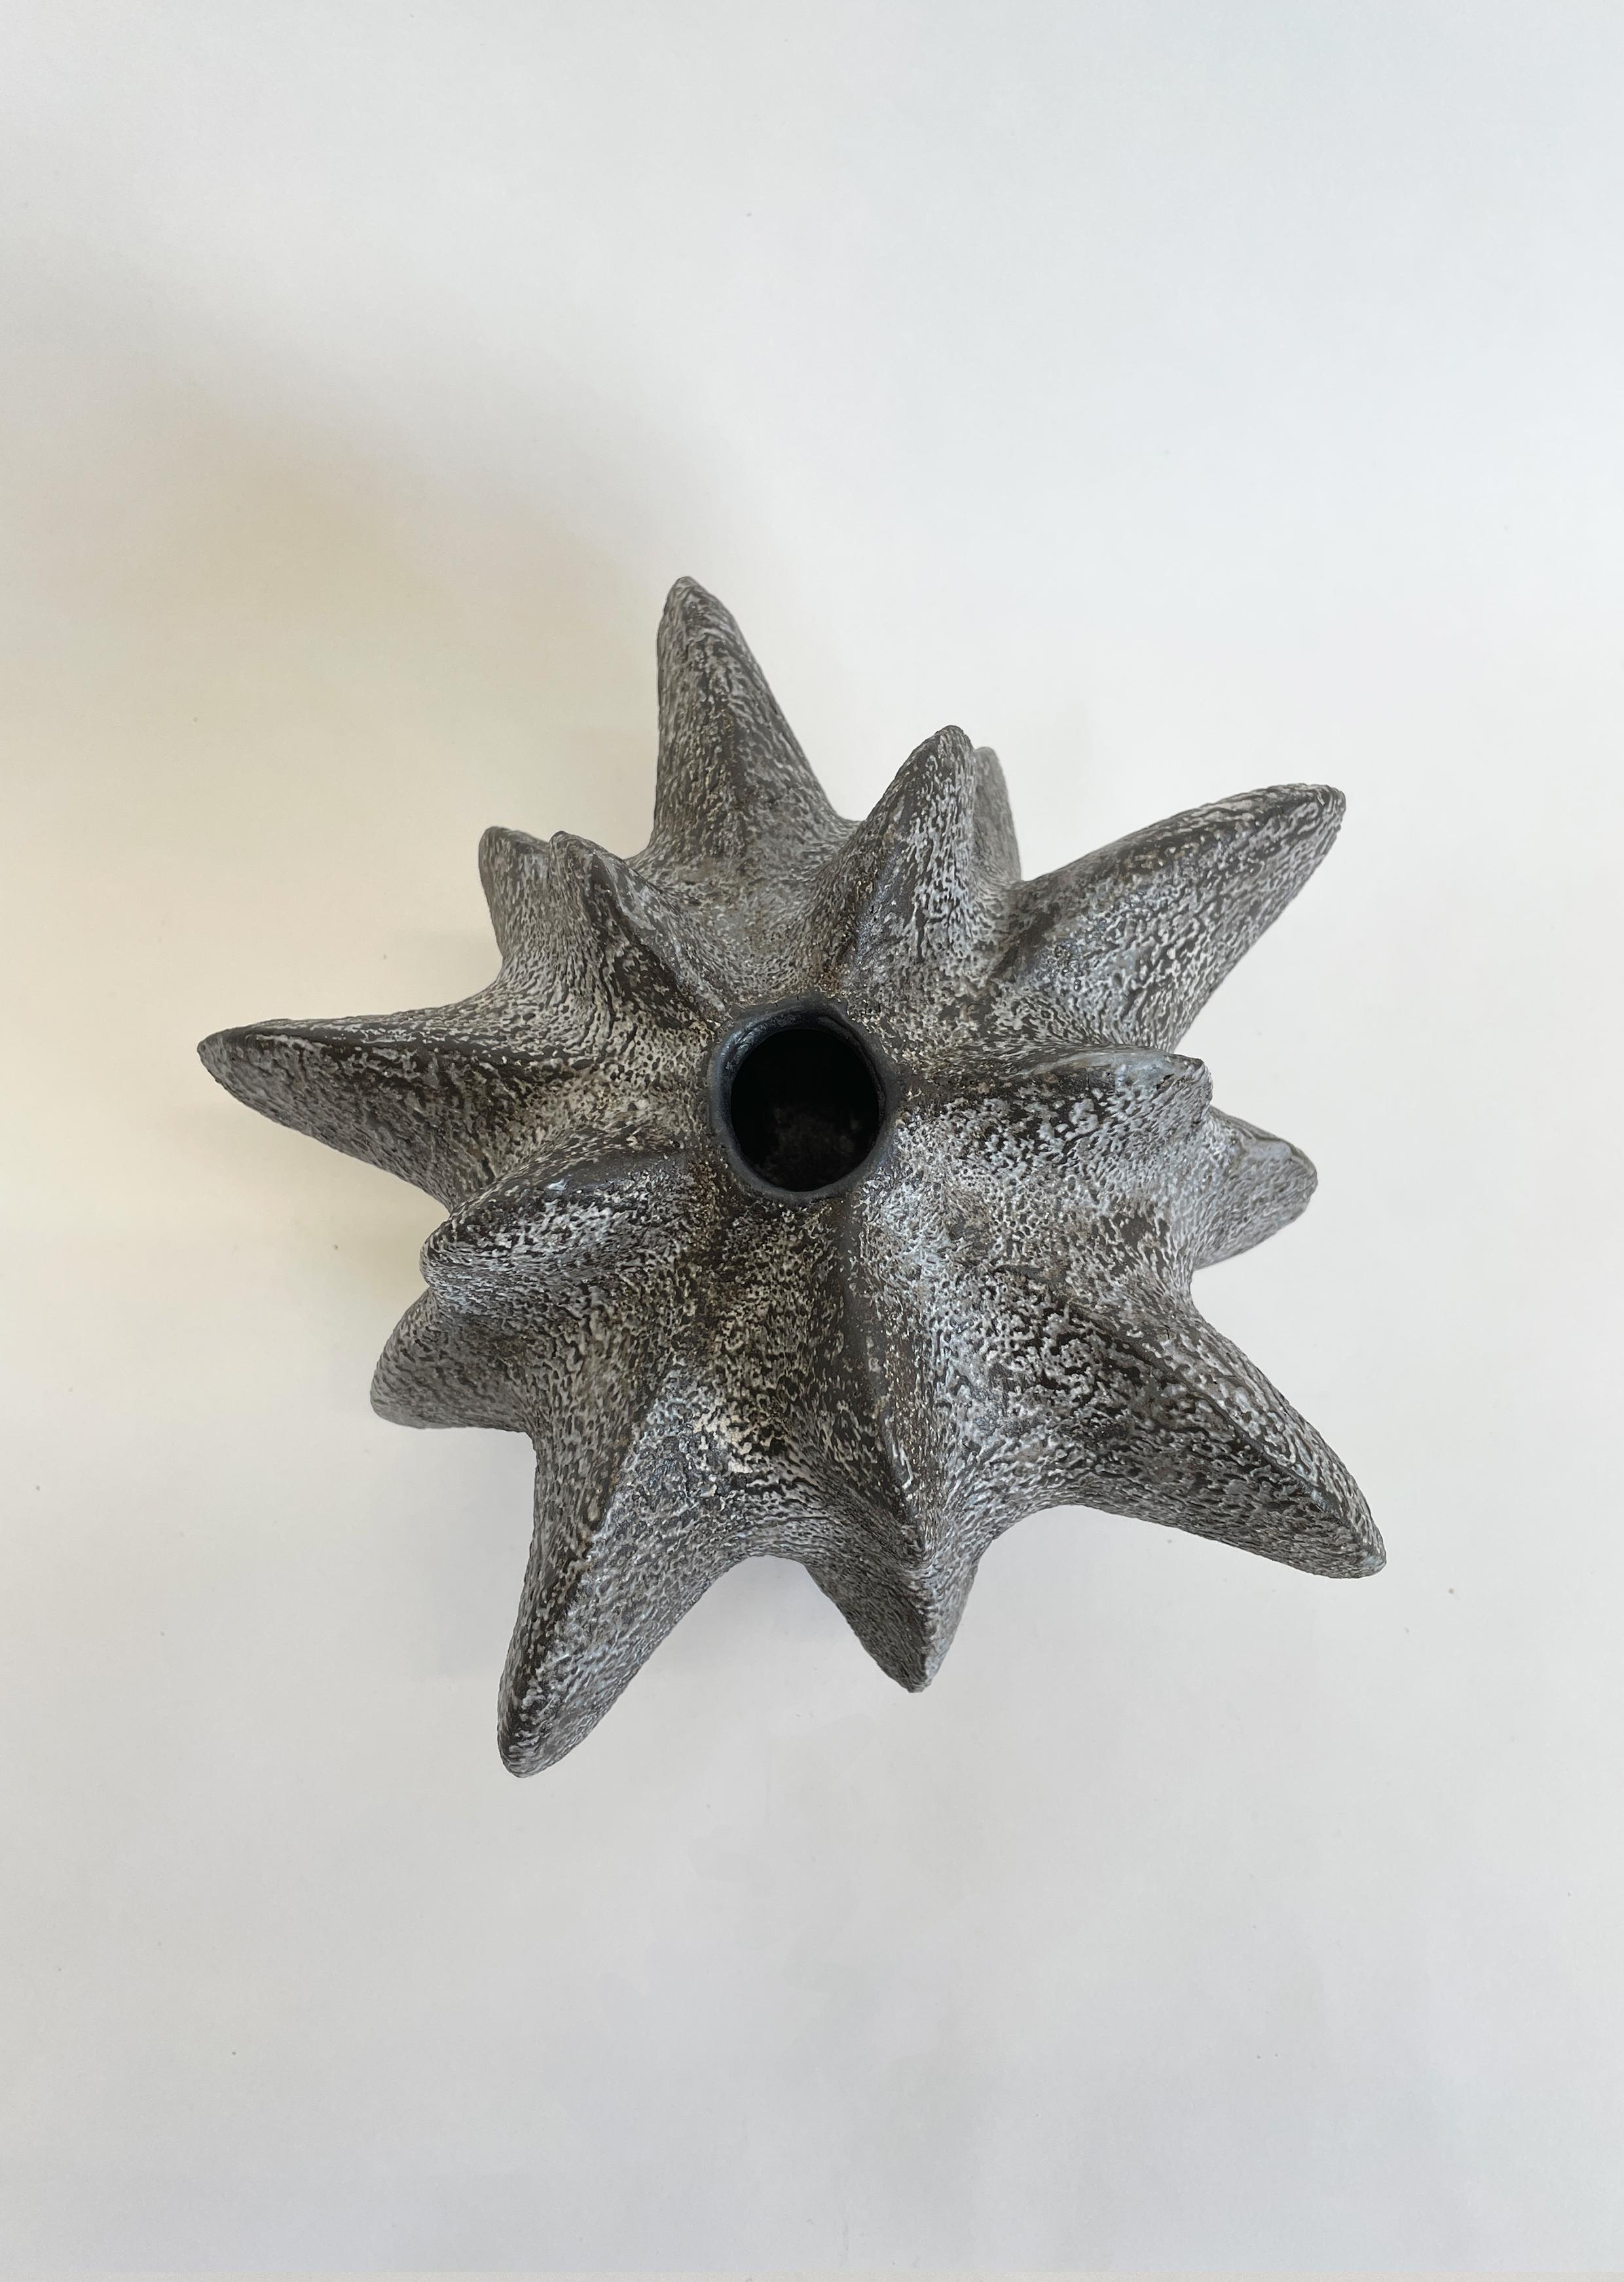 Charcoal petal gourd I by Julie Nelson
One Of A Kind
Dimensions: D 28 x H 22 cm
Materials: Ceramic stoneware and porcelain

Artist Julie Nelson uses the materiality of clay as a means to explore naturally occurring patterns and